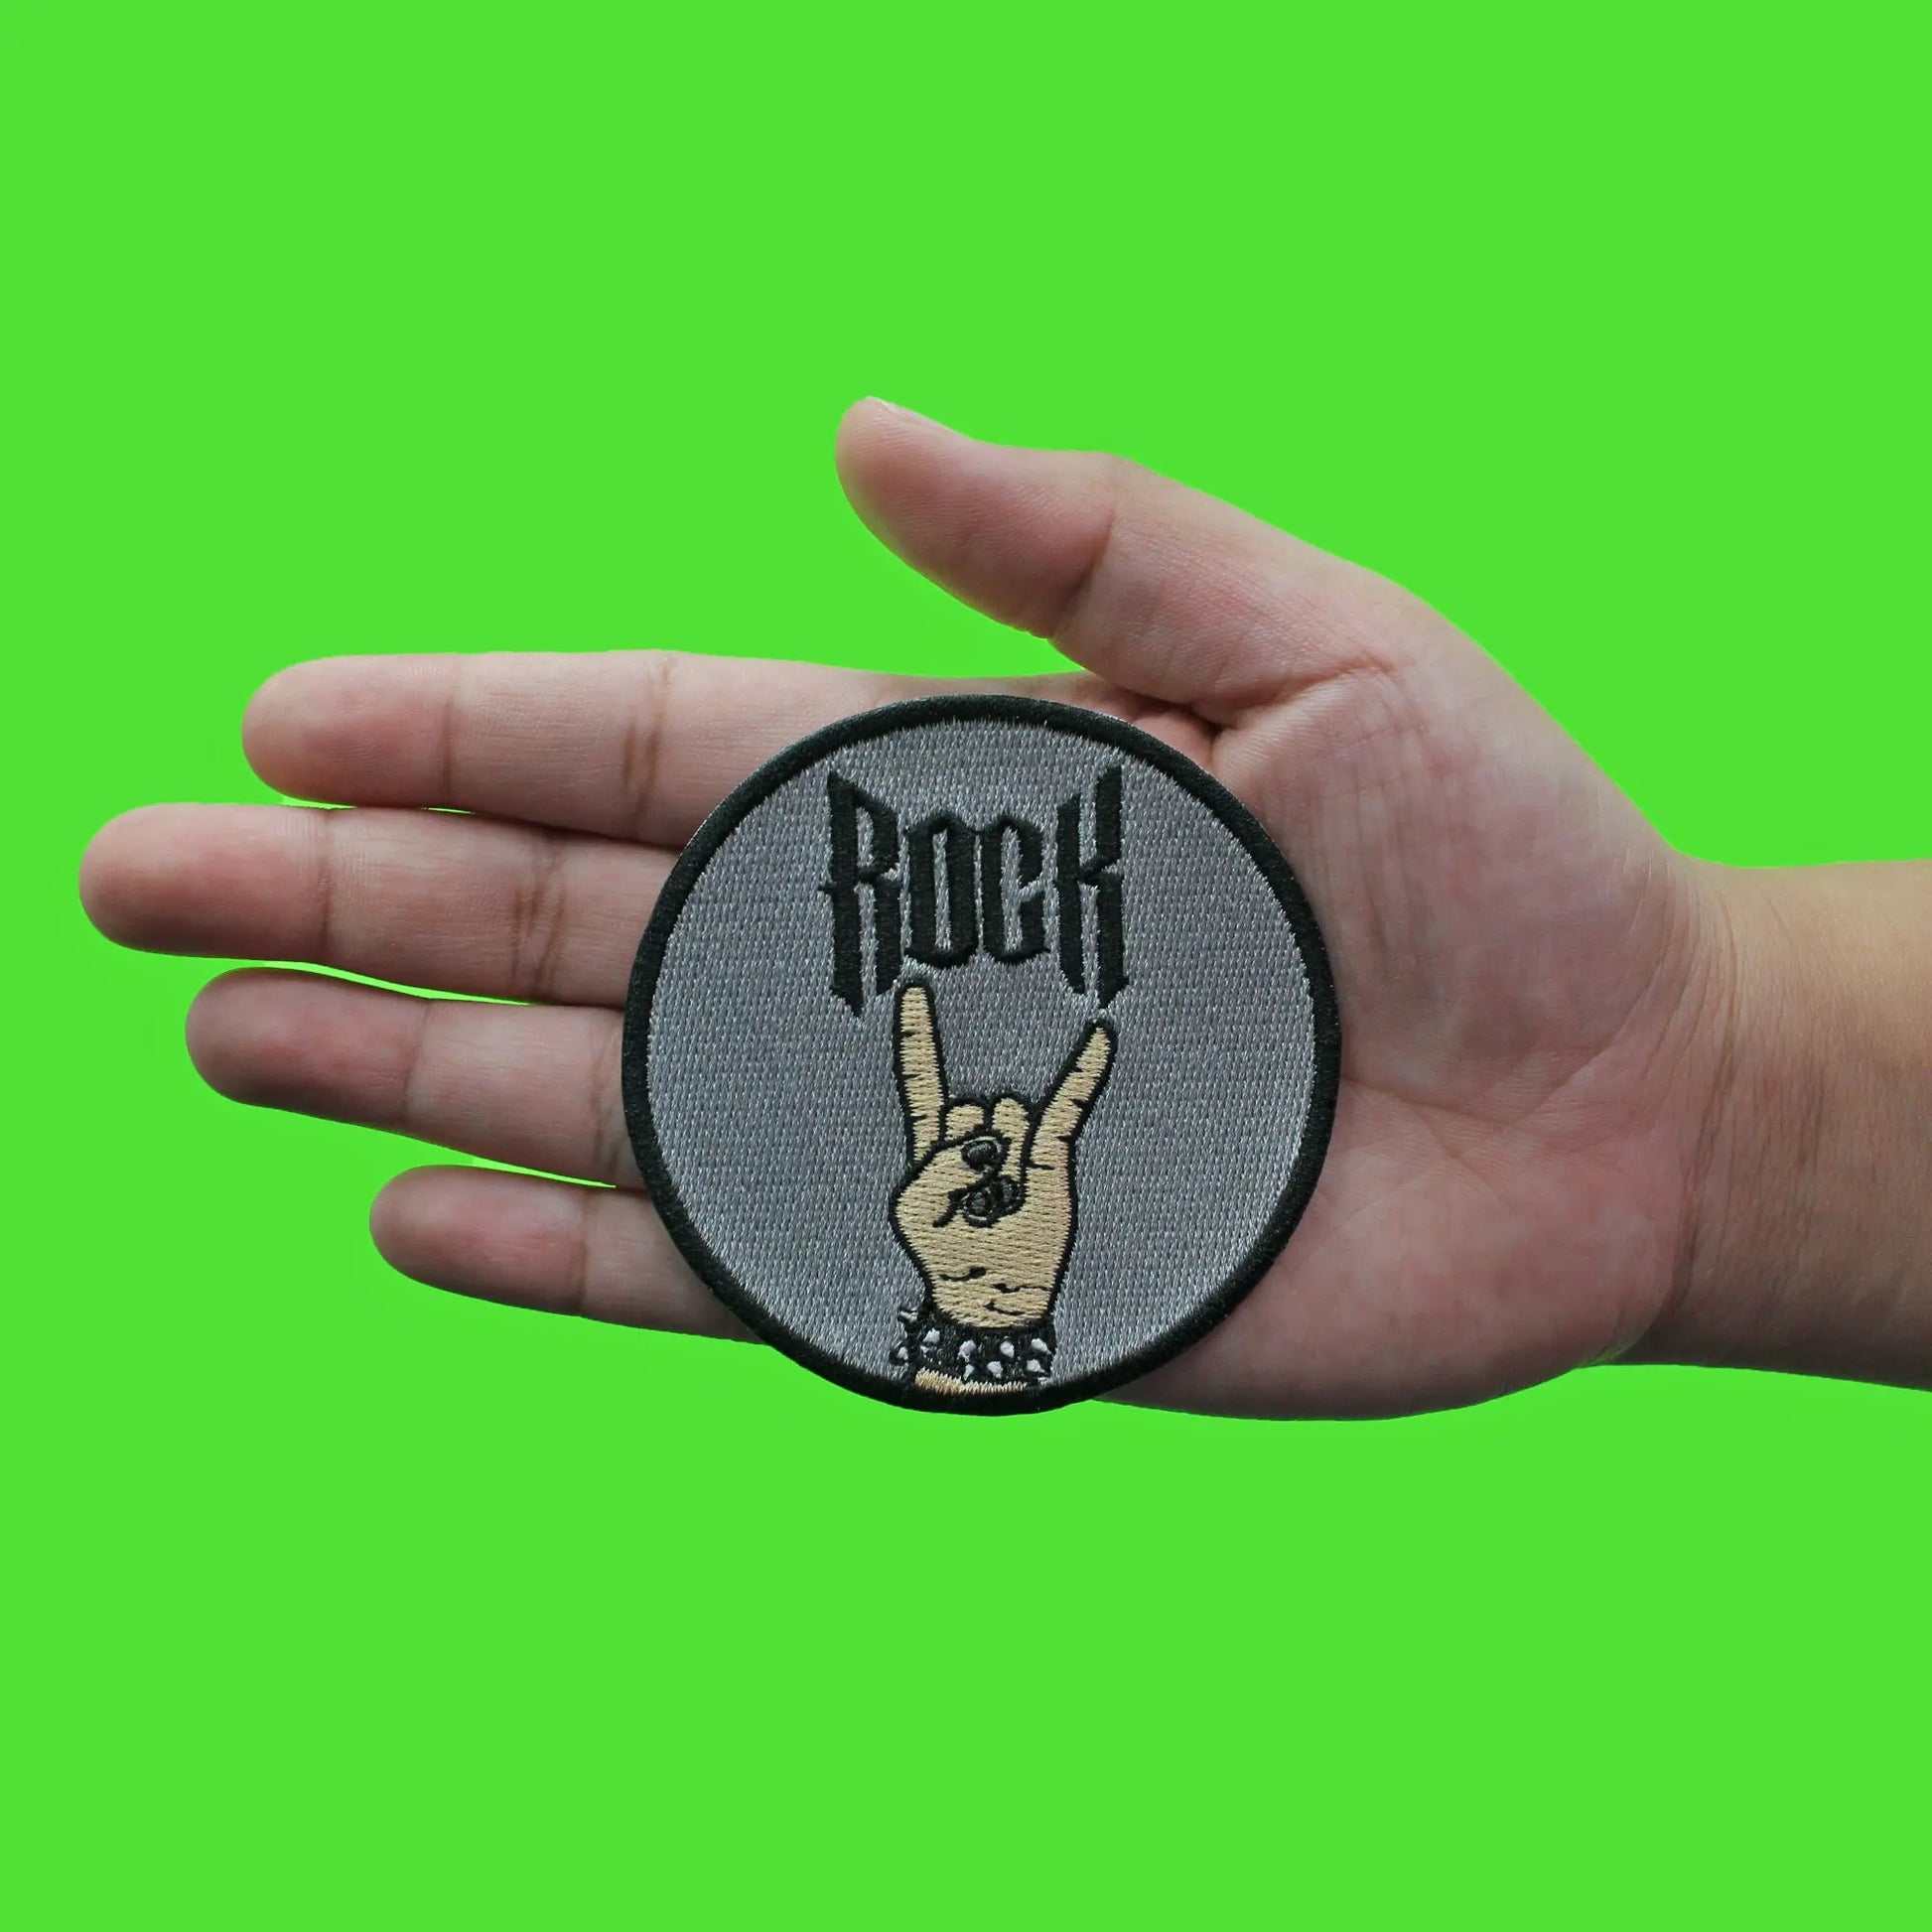 Rock Sign Hand Patch Alternative Rock Metal Embroidered Iron on